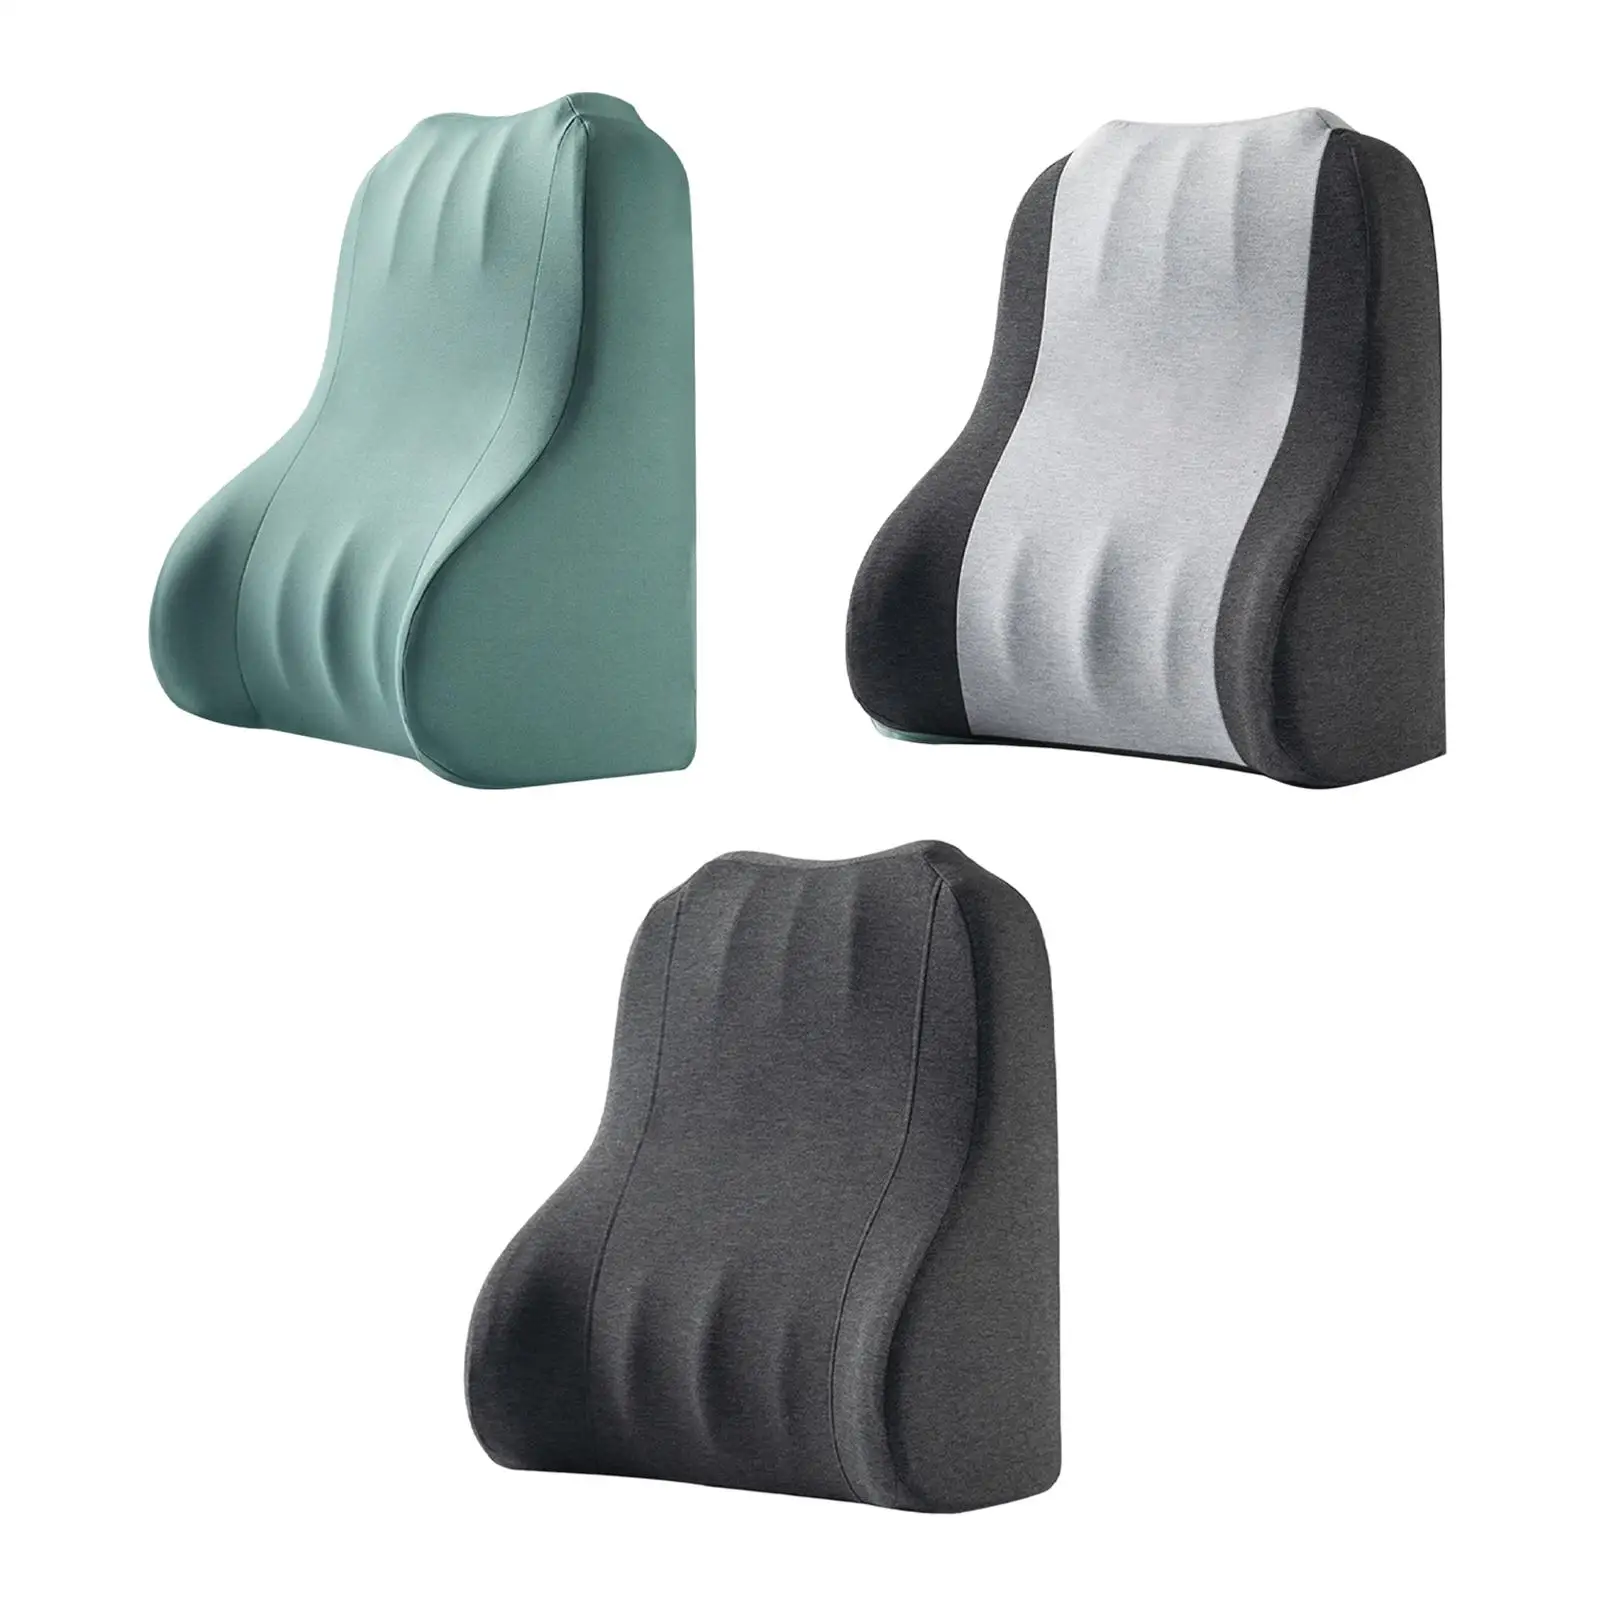 Breathable Back Cushion Neck Support Back Cushion for Computer Chair Home